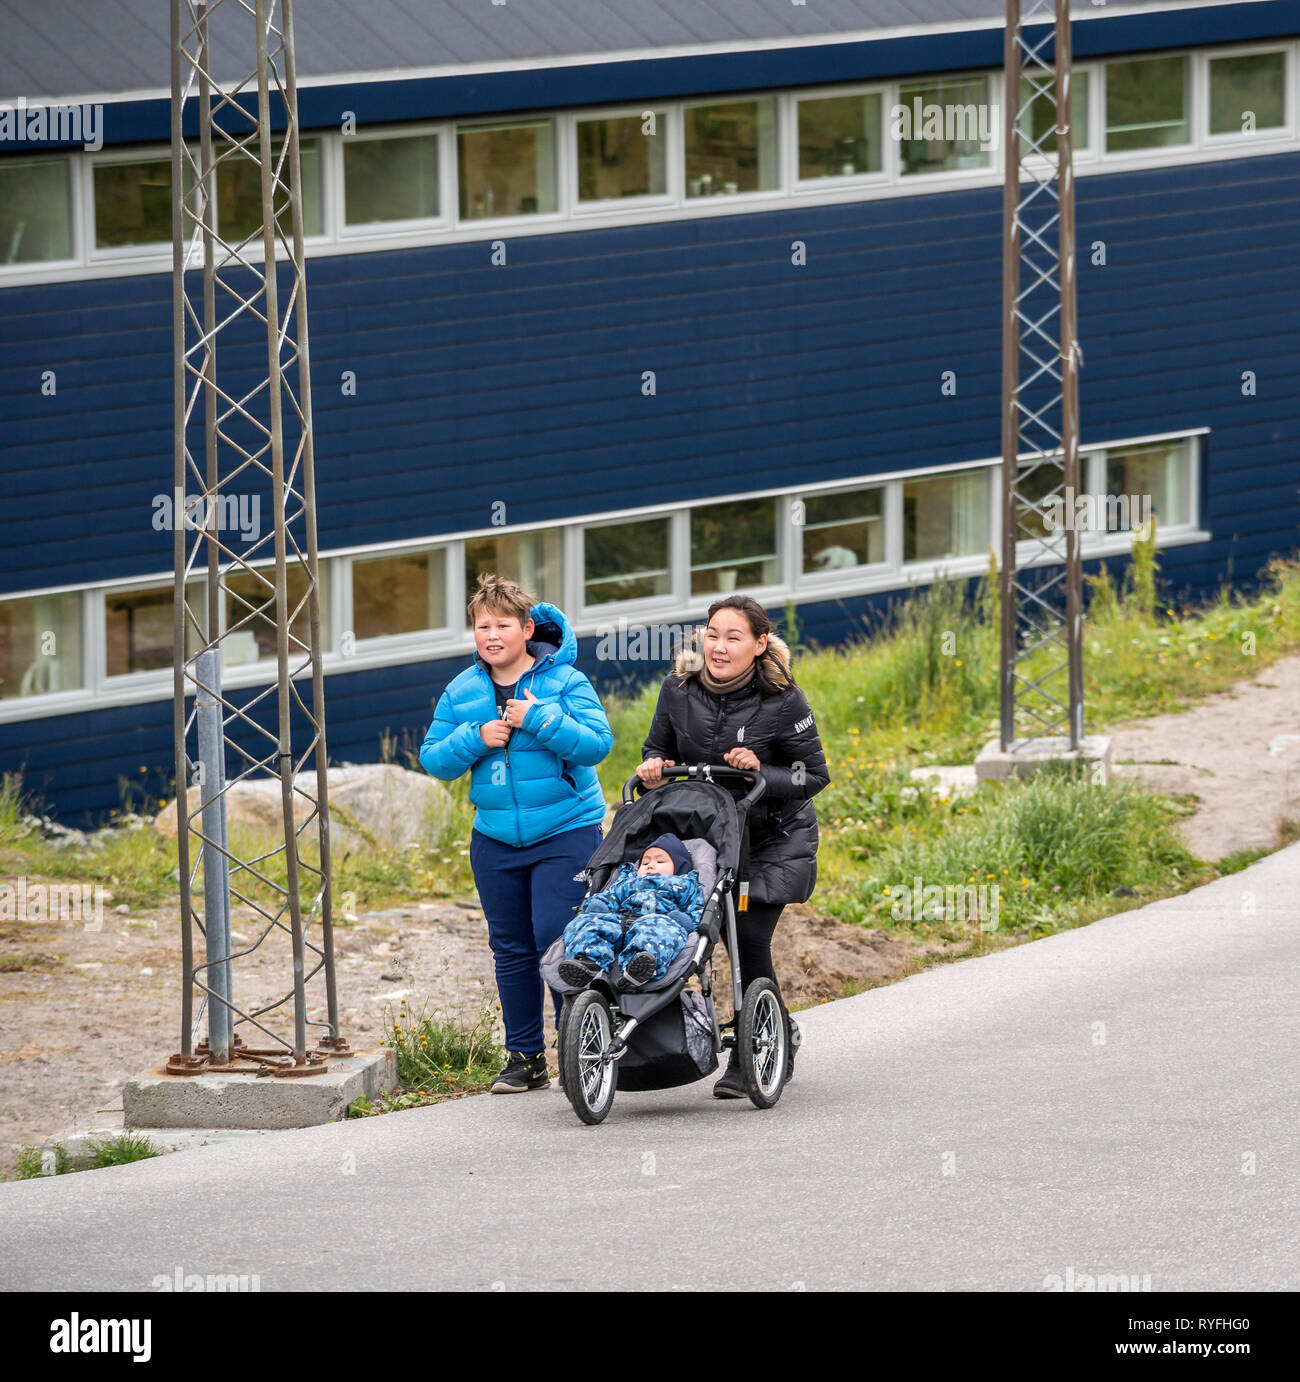 Teenage girl pushing a baby stroller with her friend, Qaqortoq, South Greenland Stock Photo